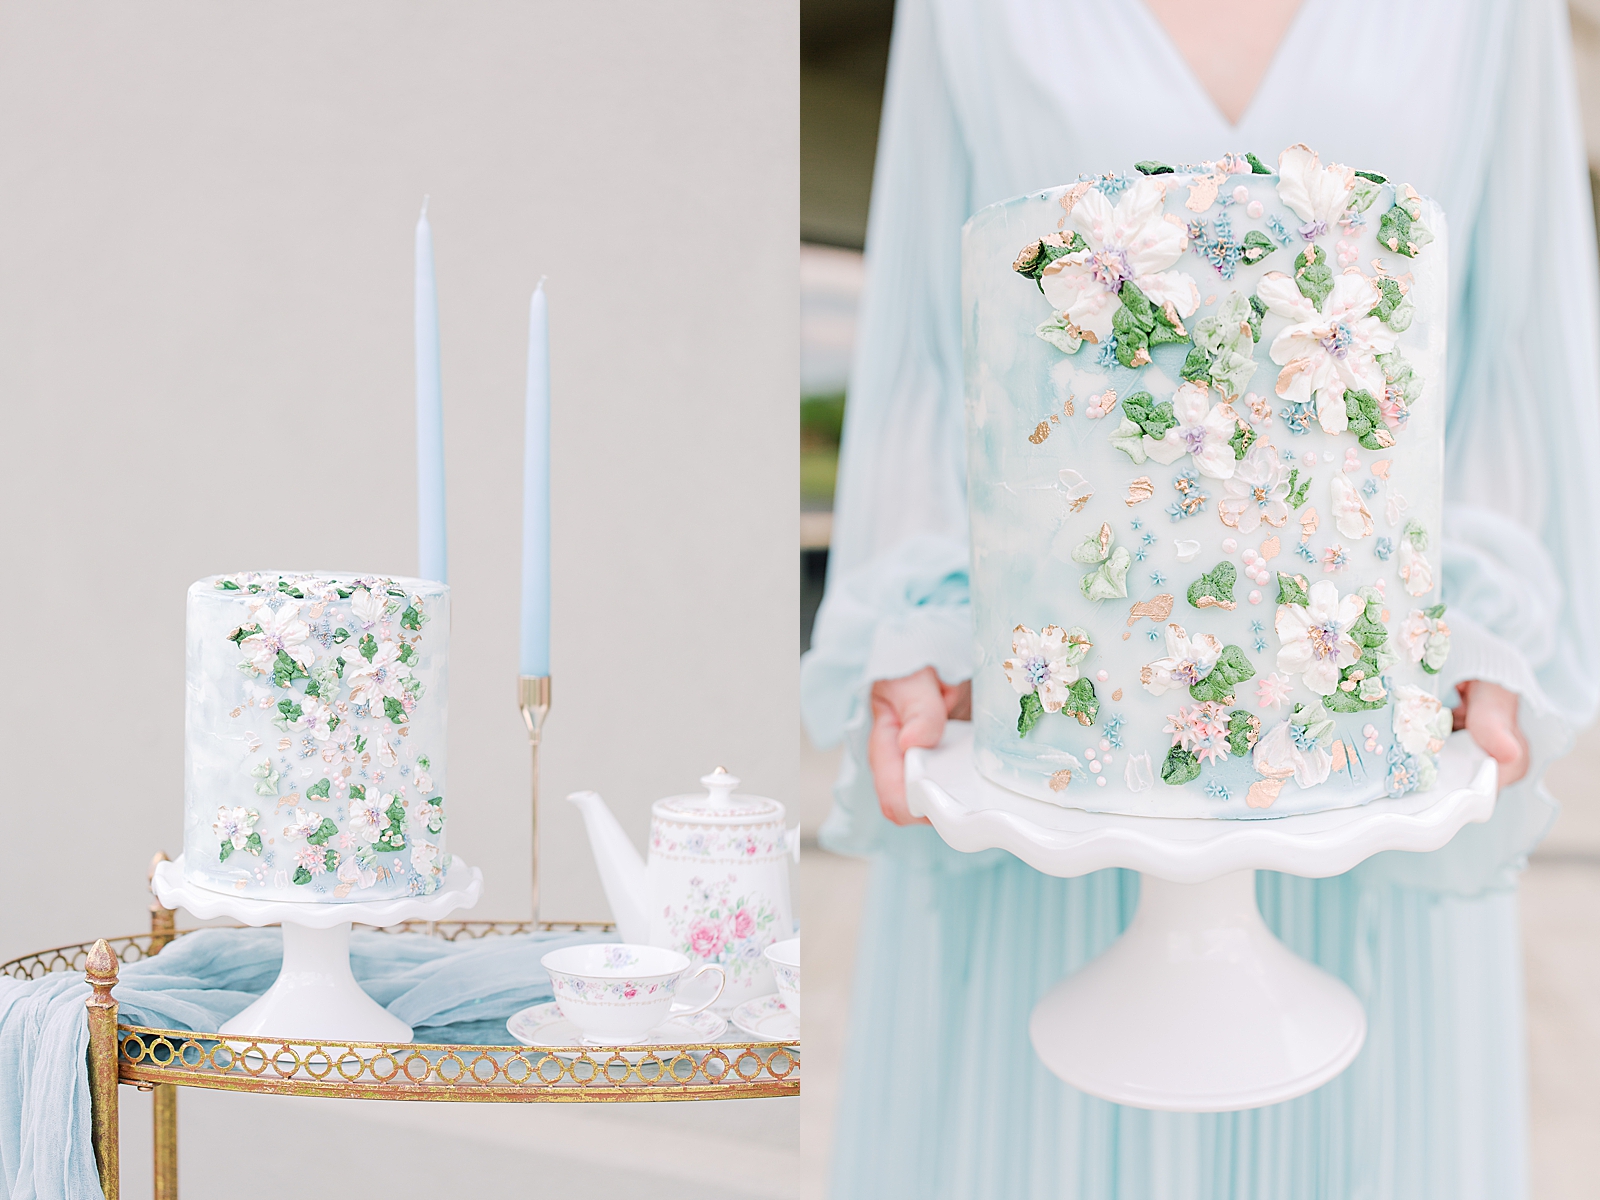 Chateau Elan Blue Cake with flowers on bar cart and Girl in Blue Dress holding cake Photos